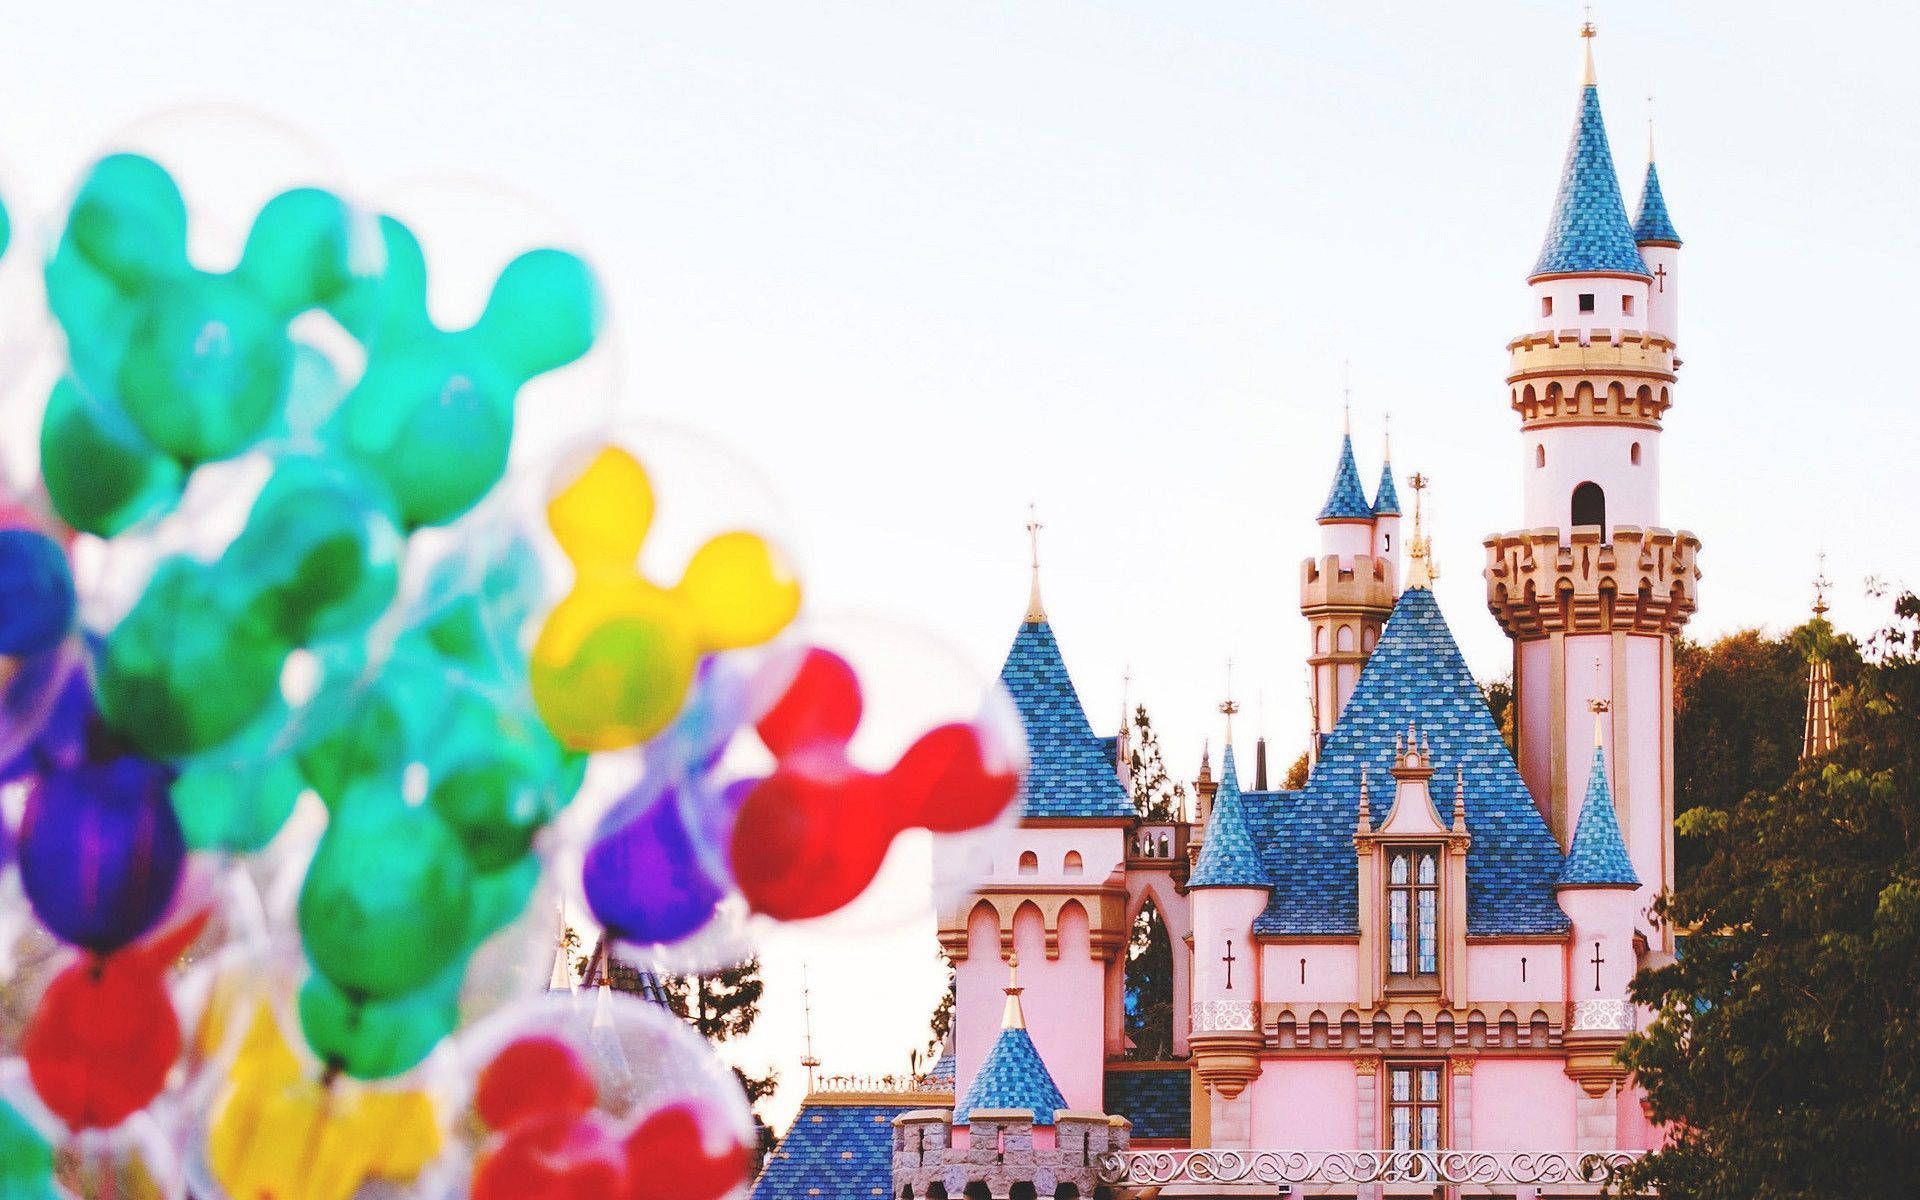 A castle with balloons in front of it - Disneyland